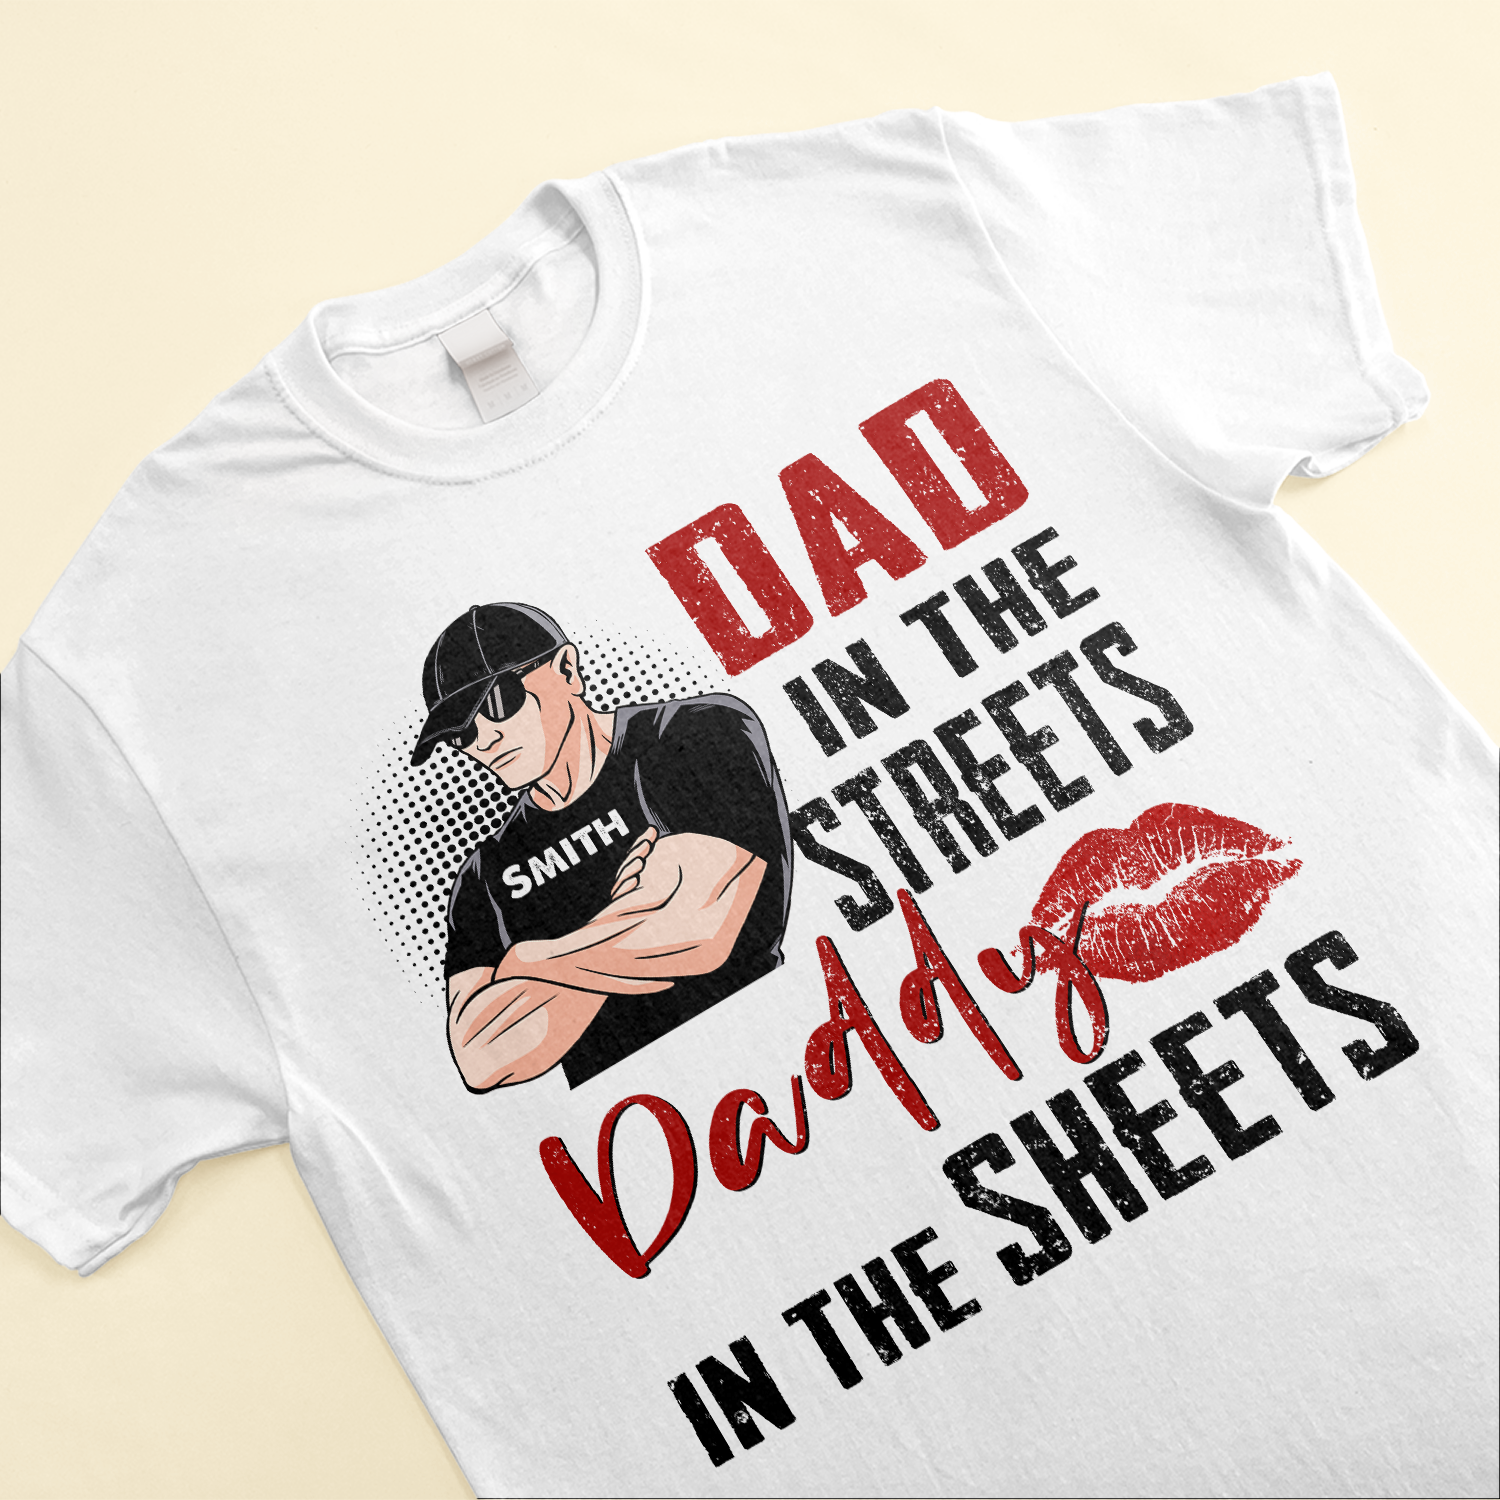 Daddy in The Sheets - Personalized Shirt - Father's Day, Birthday, Funny Gift for Husband, Boyfriend, Lover - from Wife, Girlfriend Pullover Hoodie /